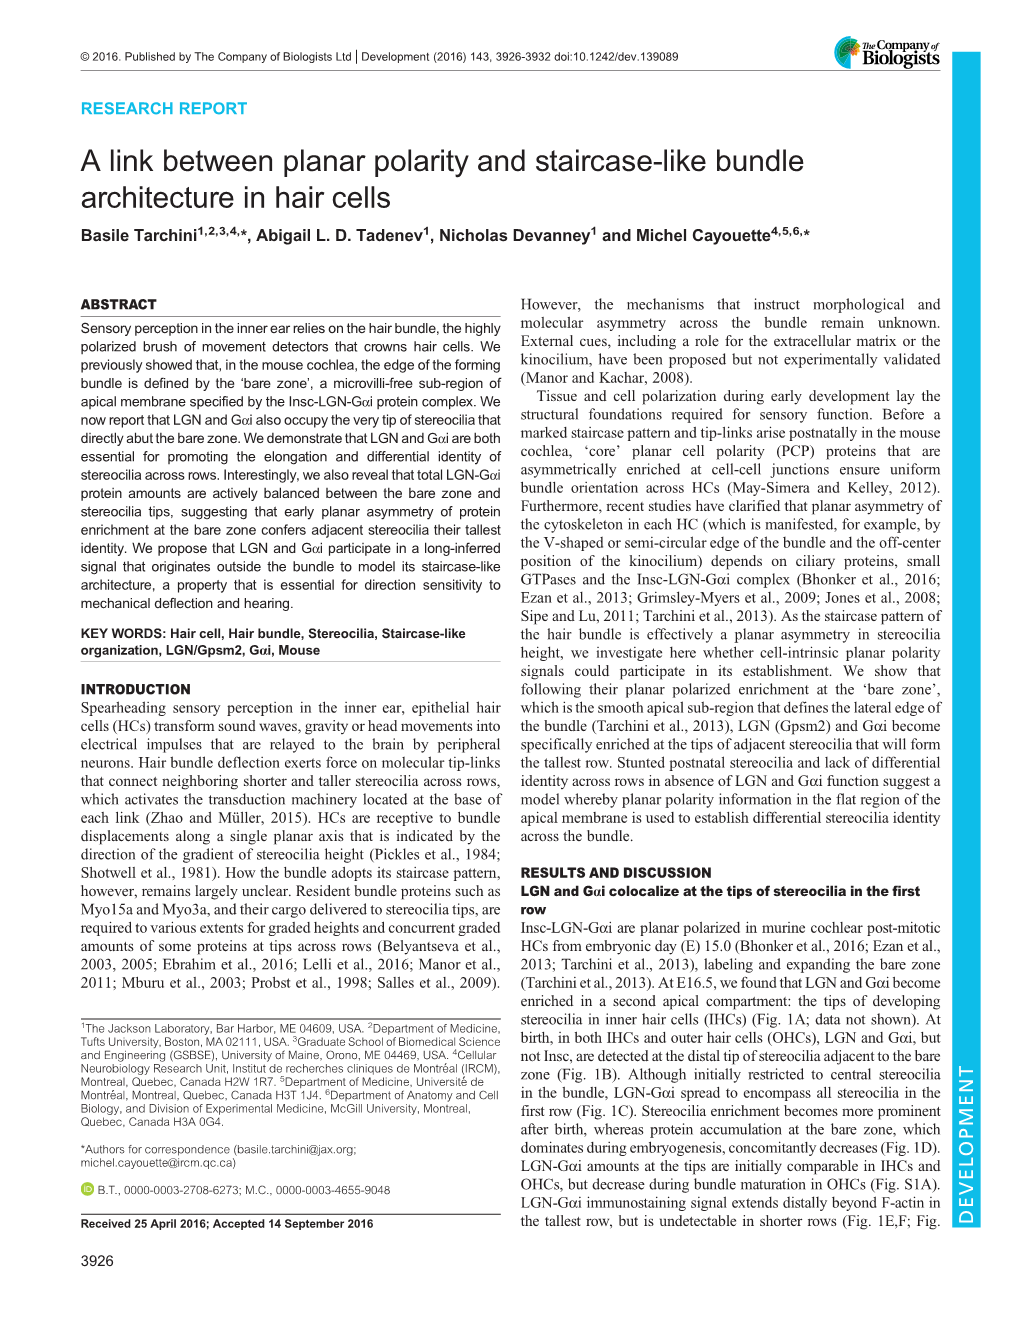 A Link Between Planar Polarity and Staircase-Like Bundle Architecture in Hair Cells Basile Tarchini1,2,3,4,*, Abigail L